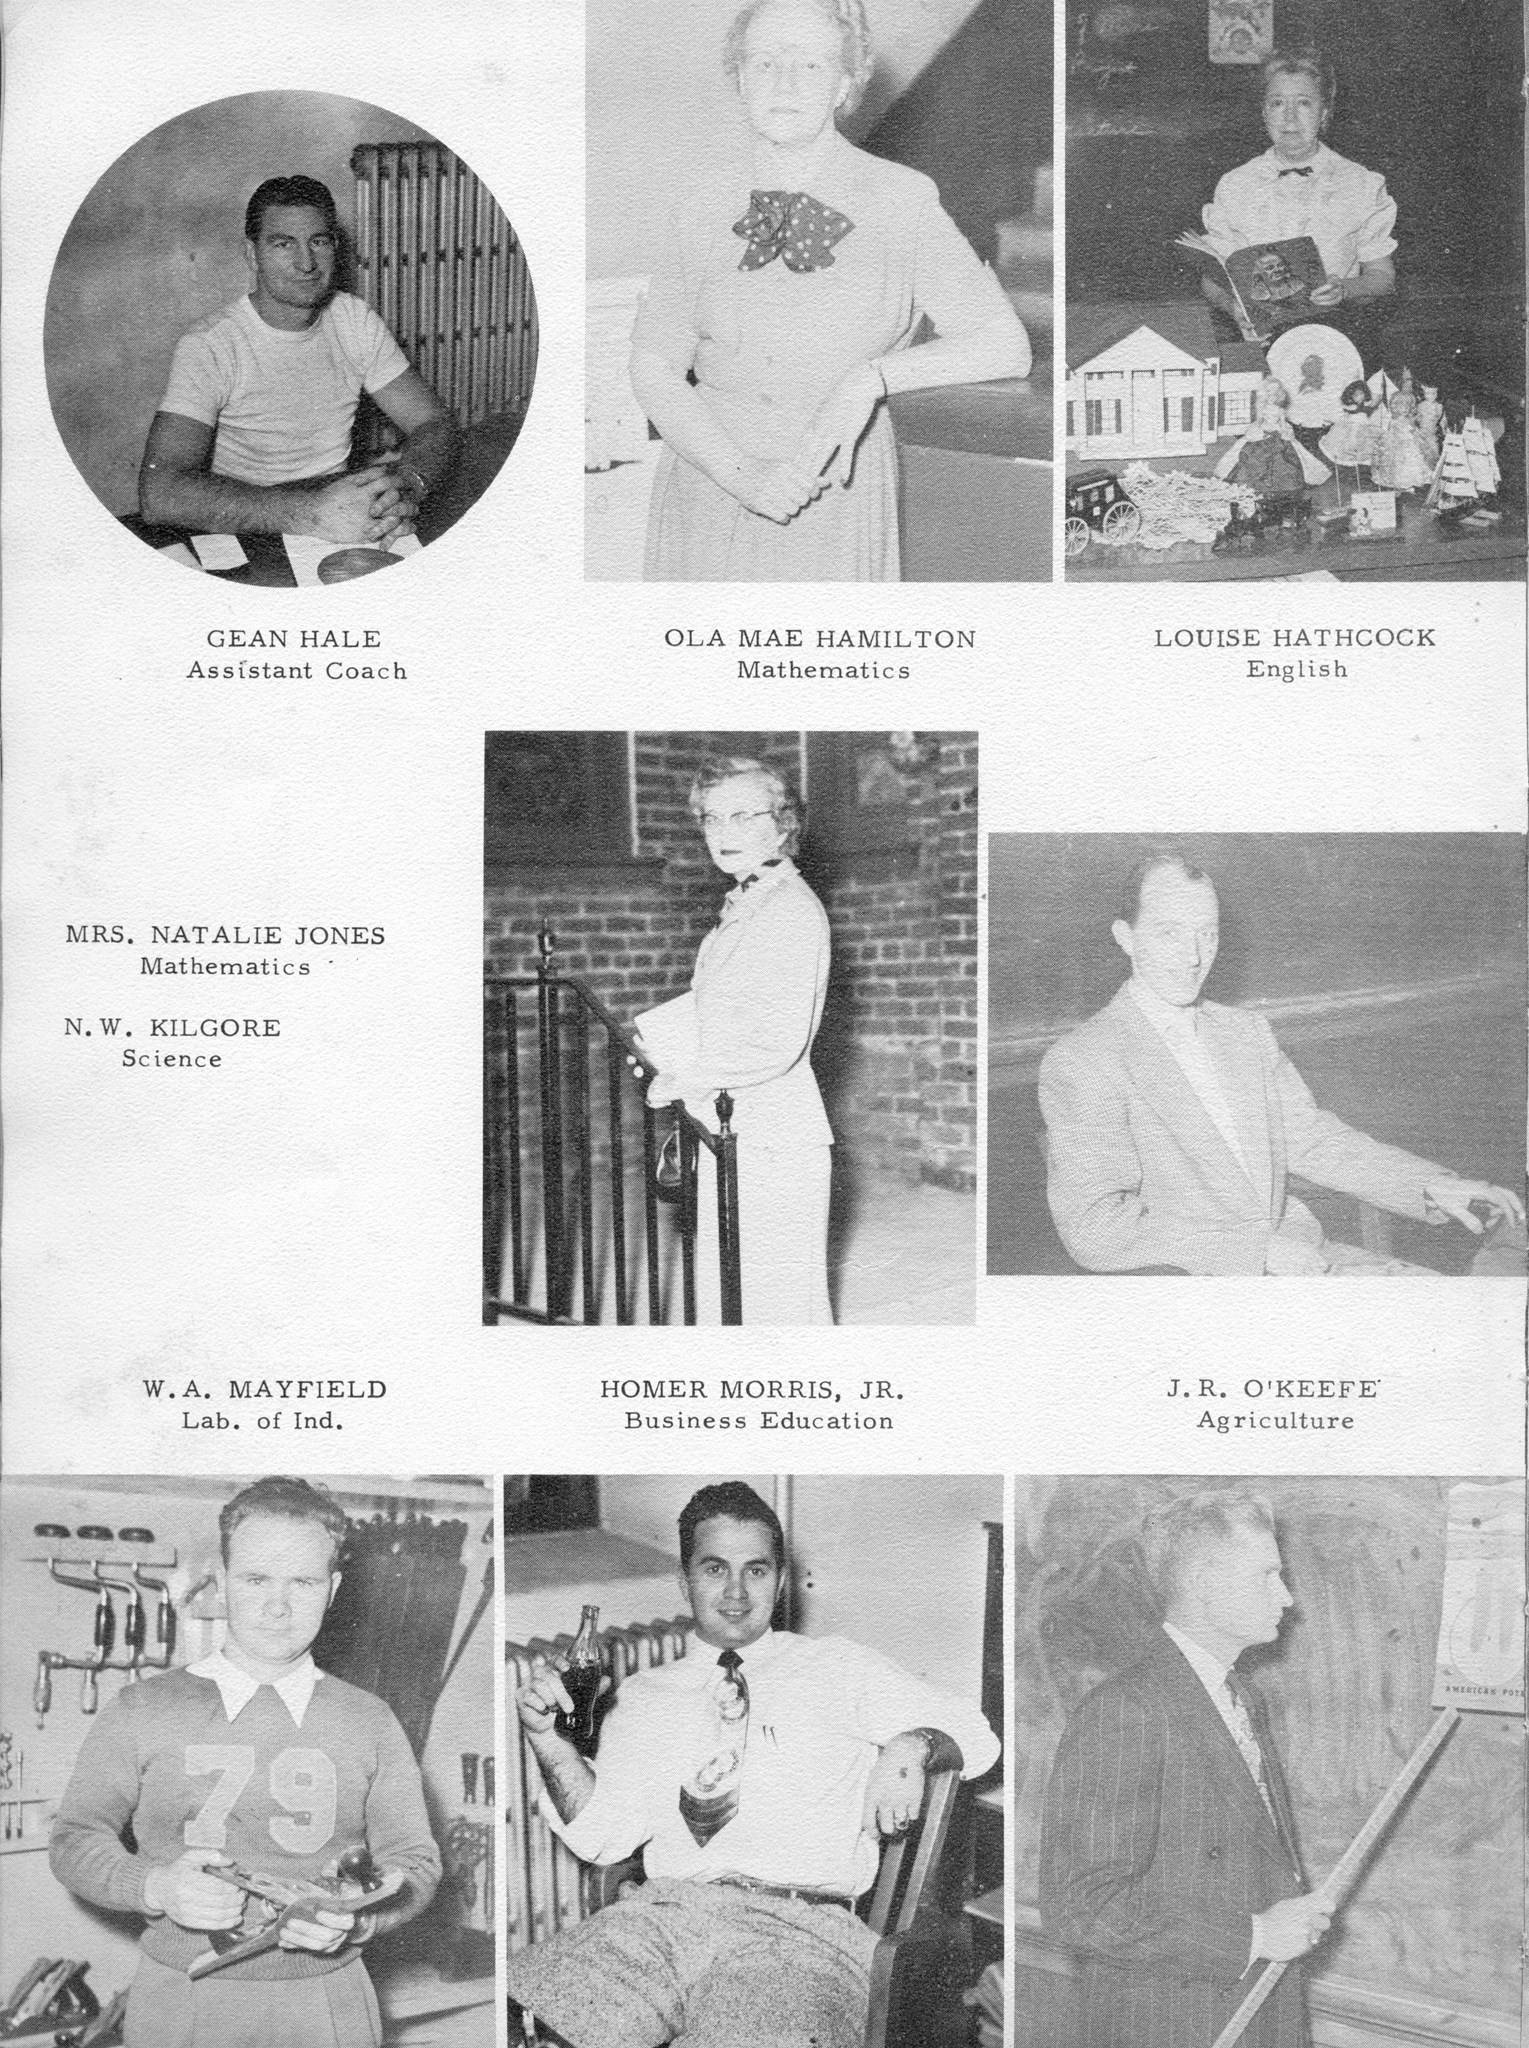 ../../../Images/Large/1952/Arclight-1952-pg0008.jpg